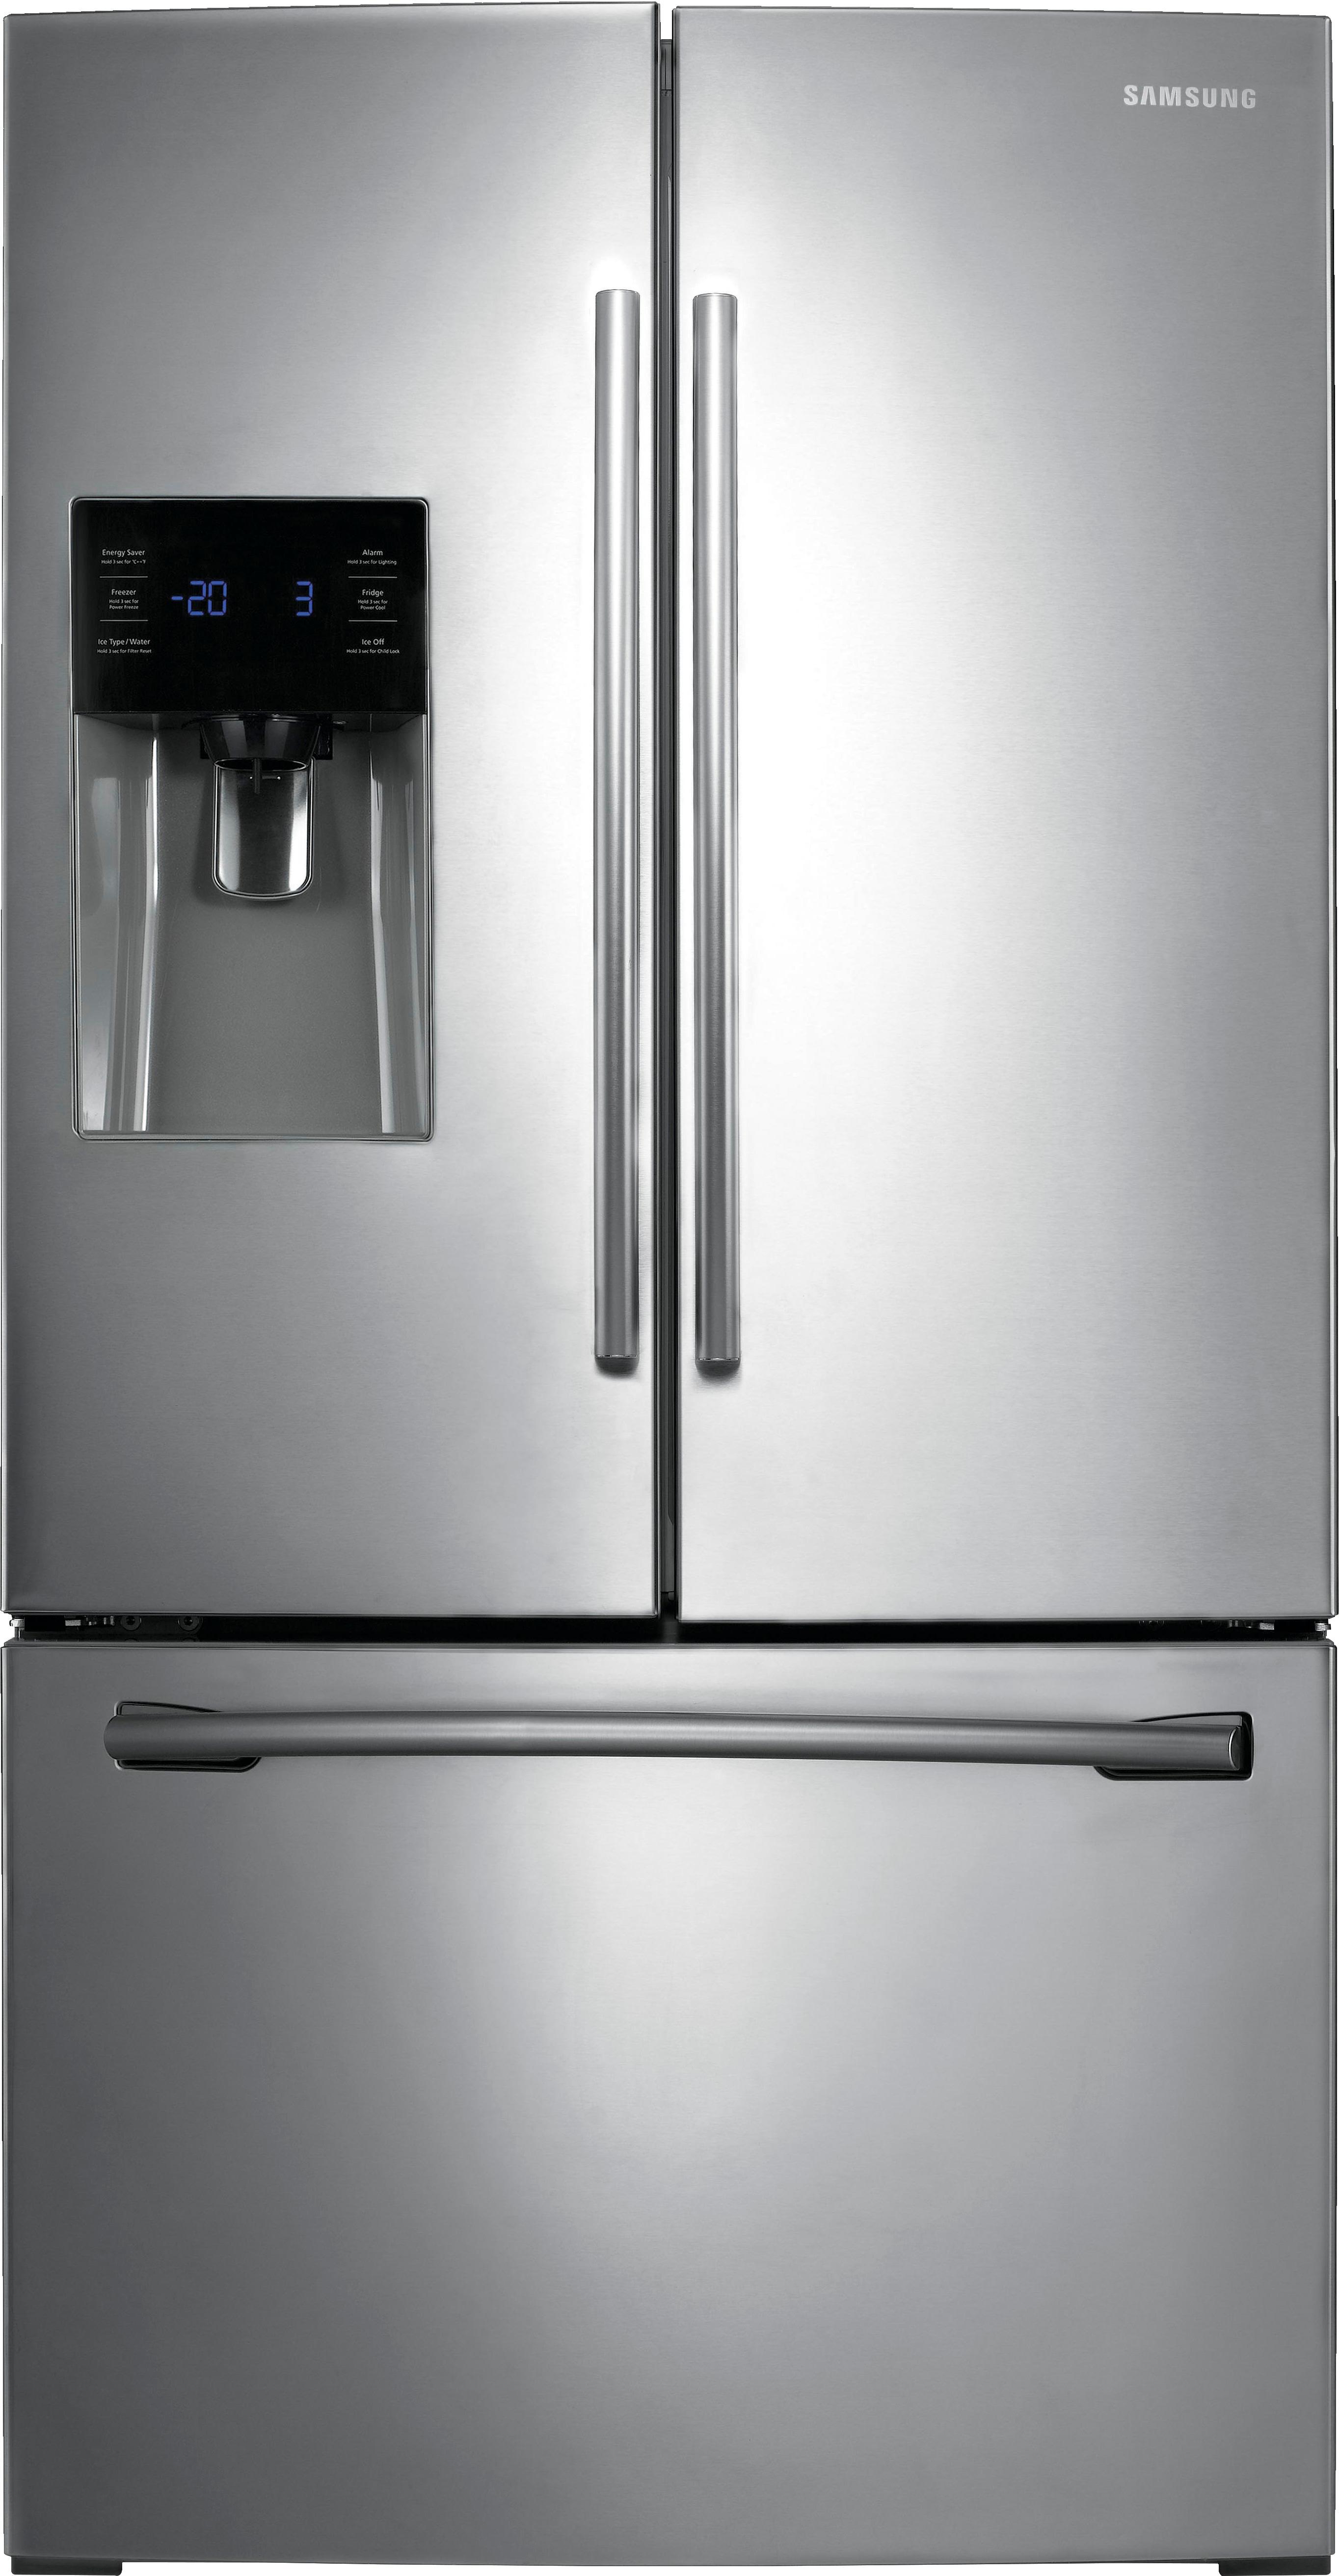 Where Is Water Filter Located In Samsung French Door Refrigerator Rfg28mesl Samsung India